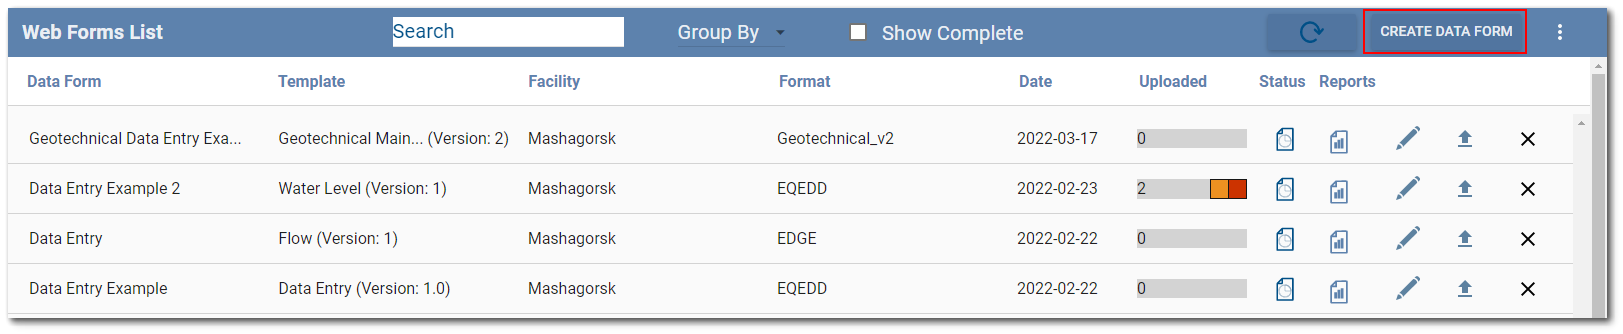 ent-web_forms_widget-create_new_form_zoom50